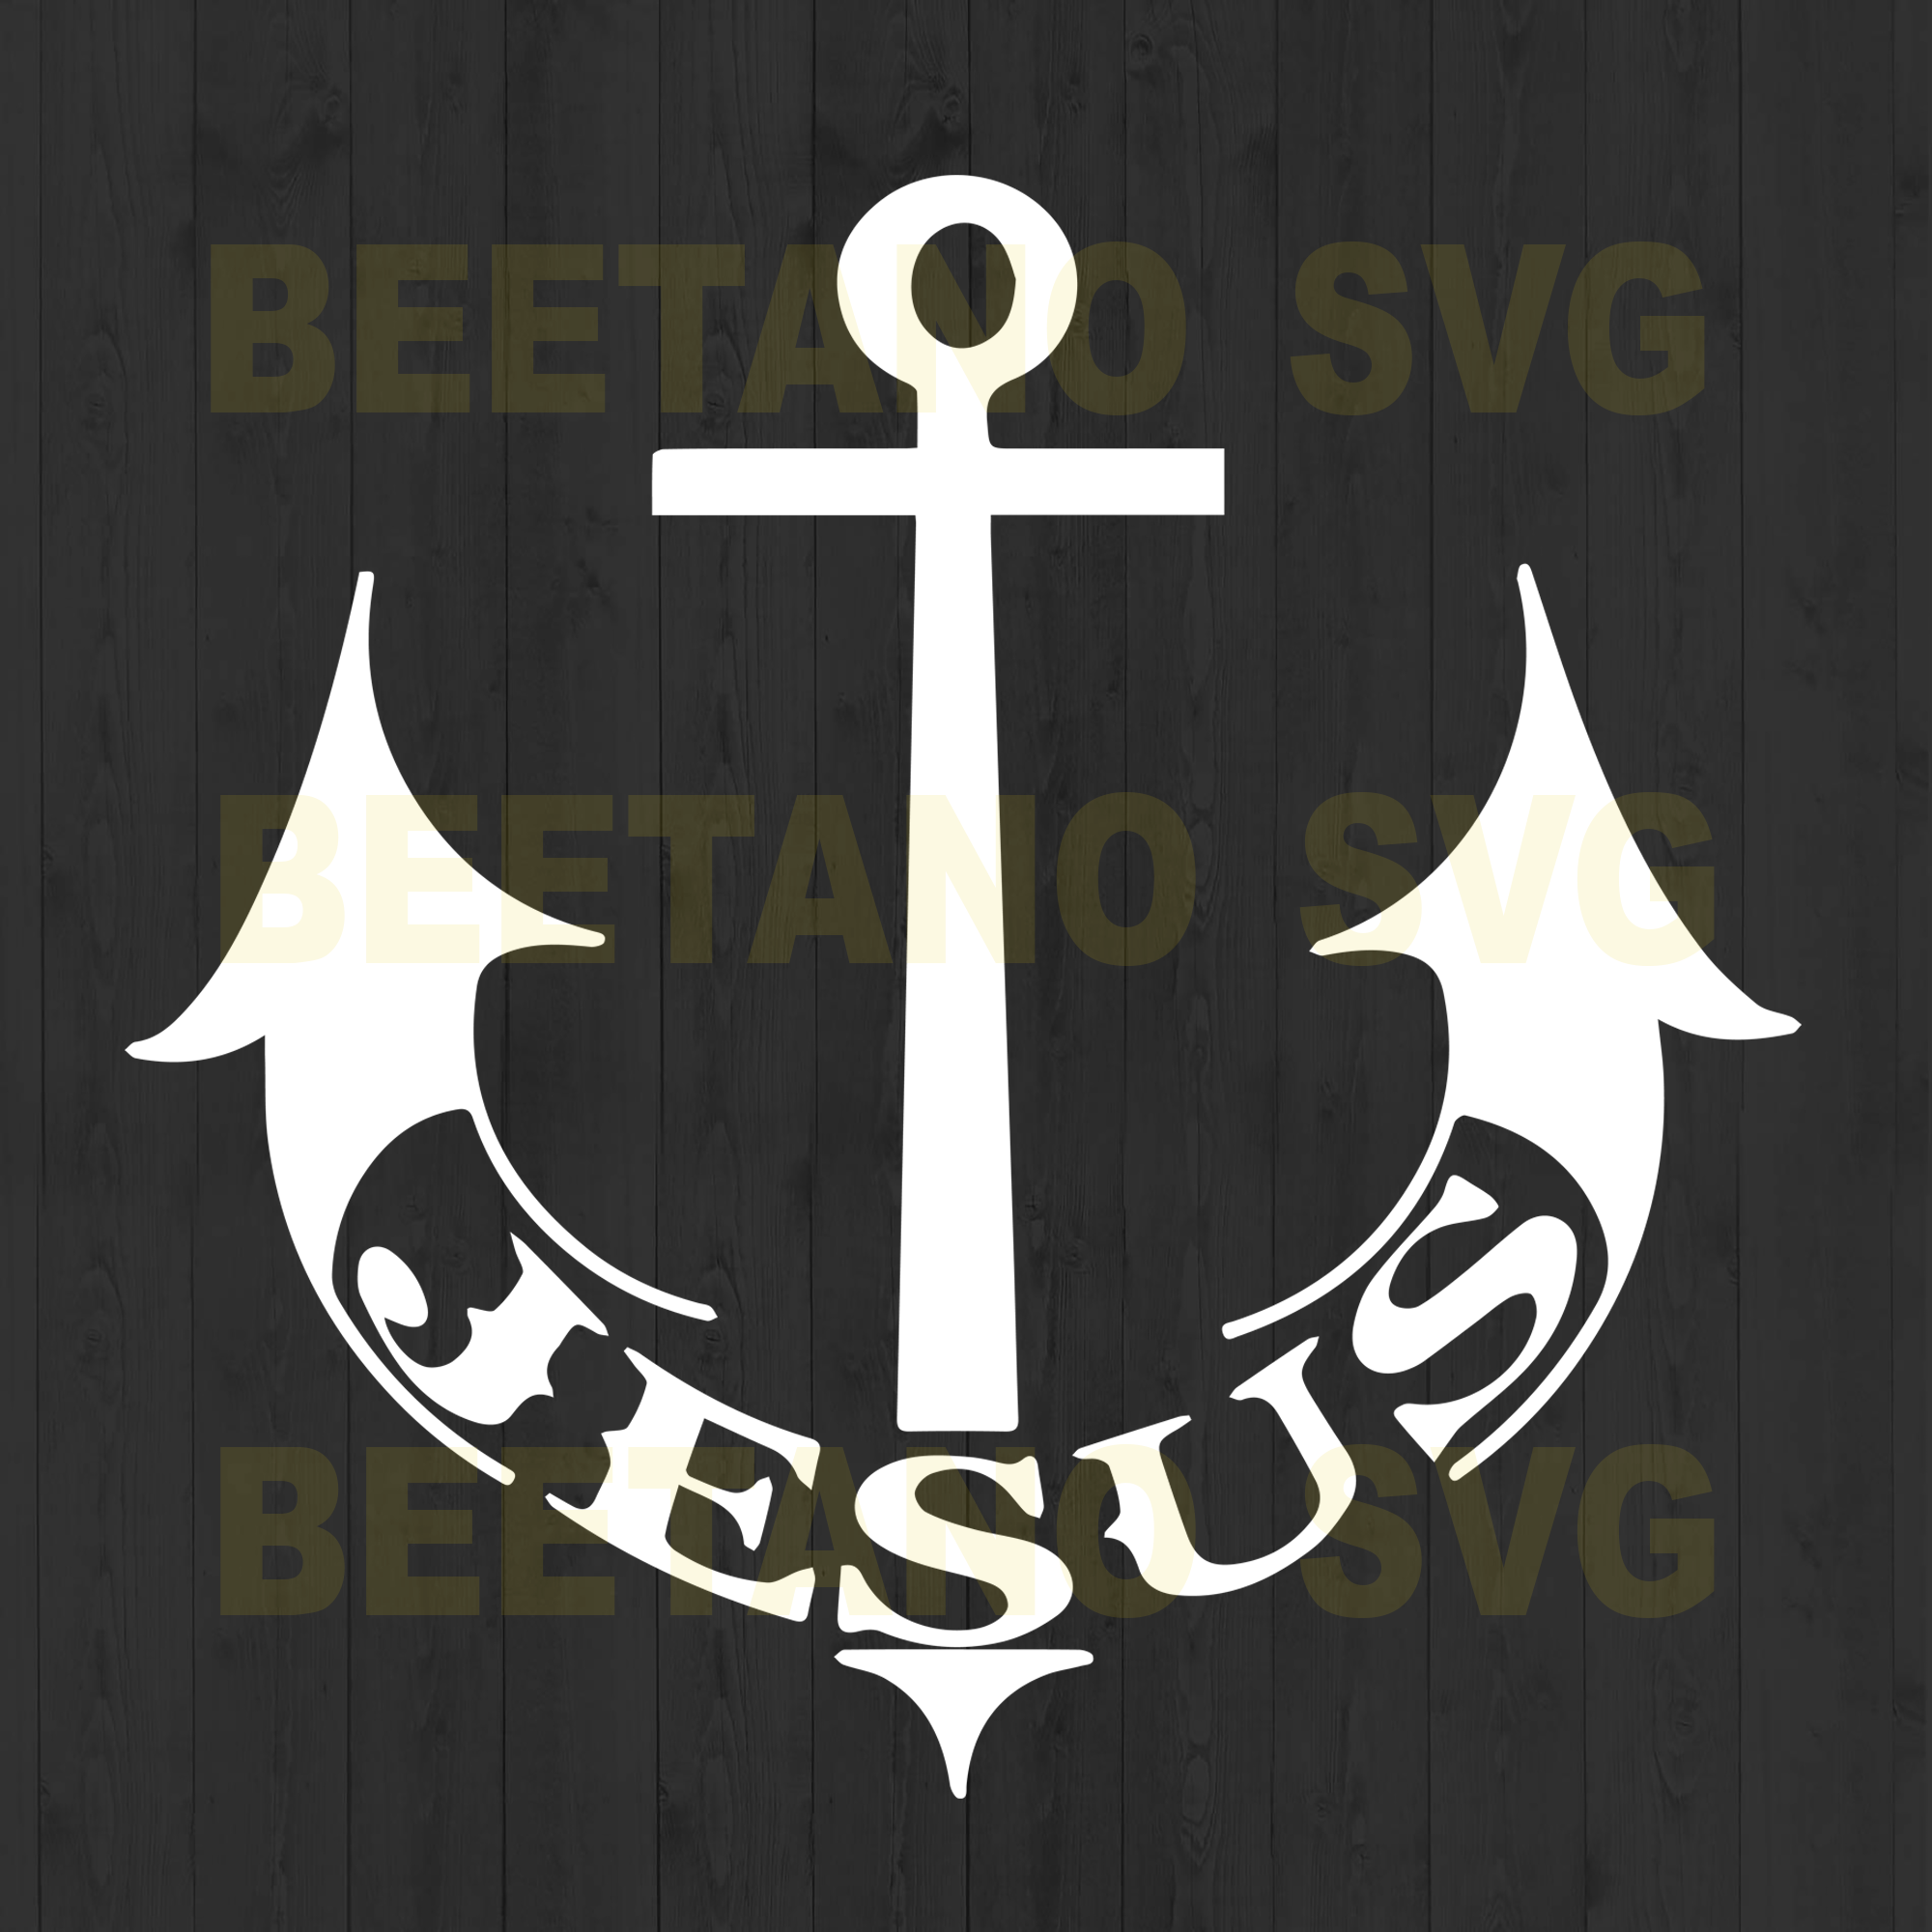 Download Anchor Jesus High Quality Svg Cut Files Best For Unique Craft Beetanosvg Scalable Vector Graphics